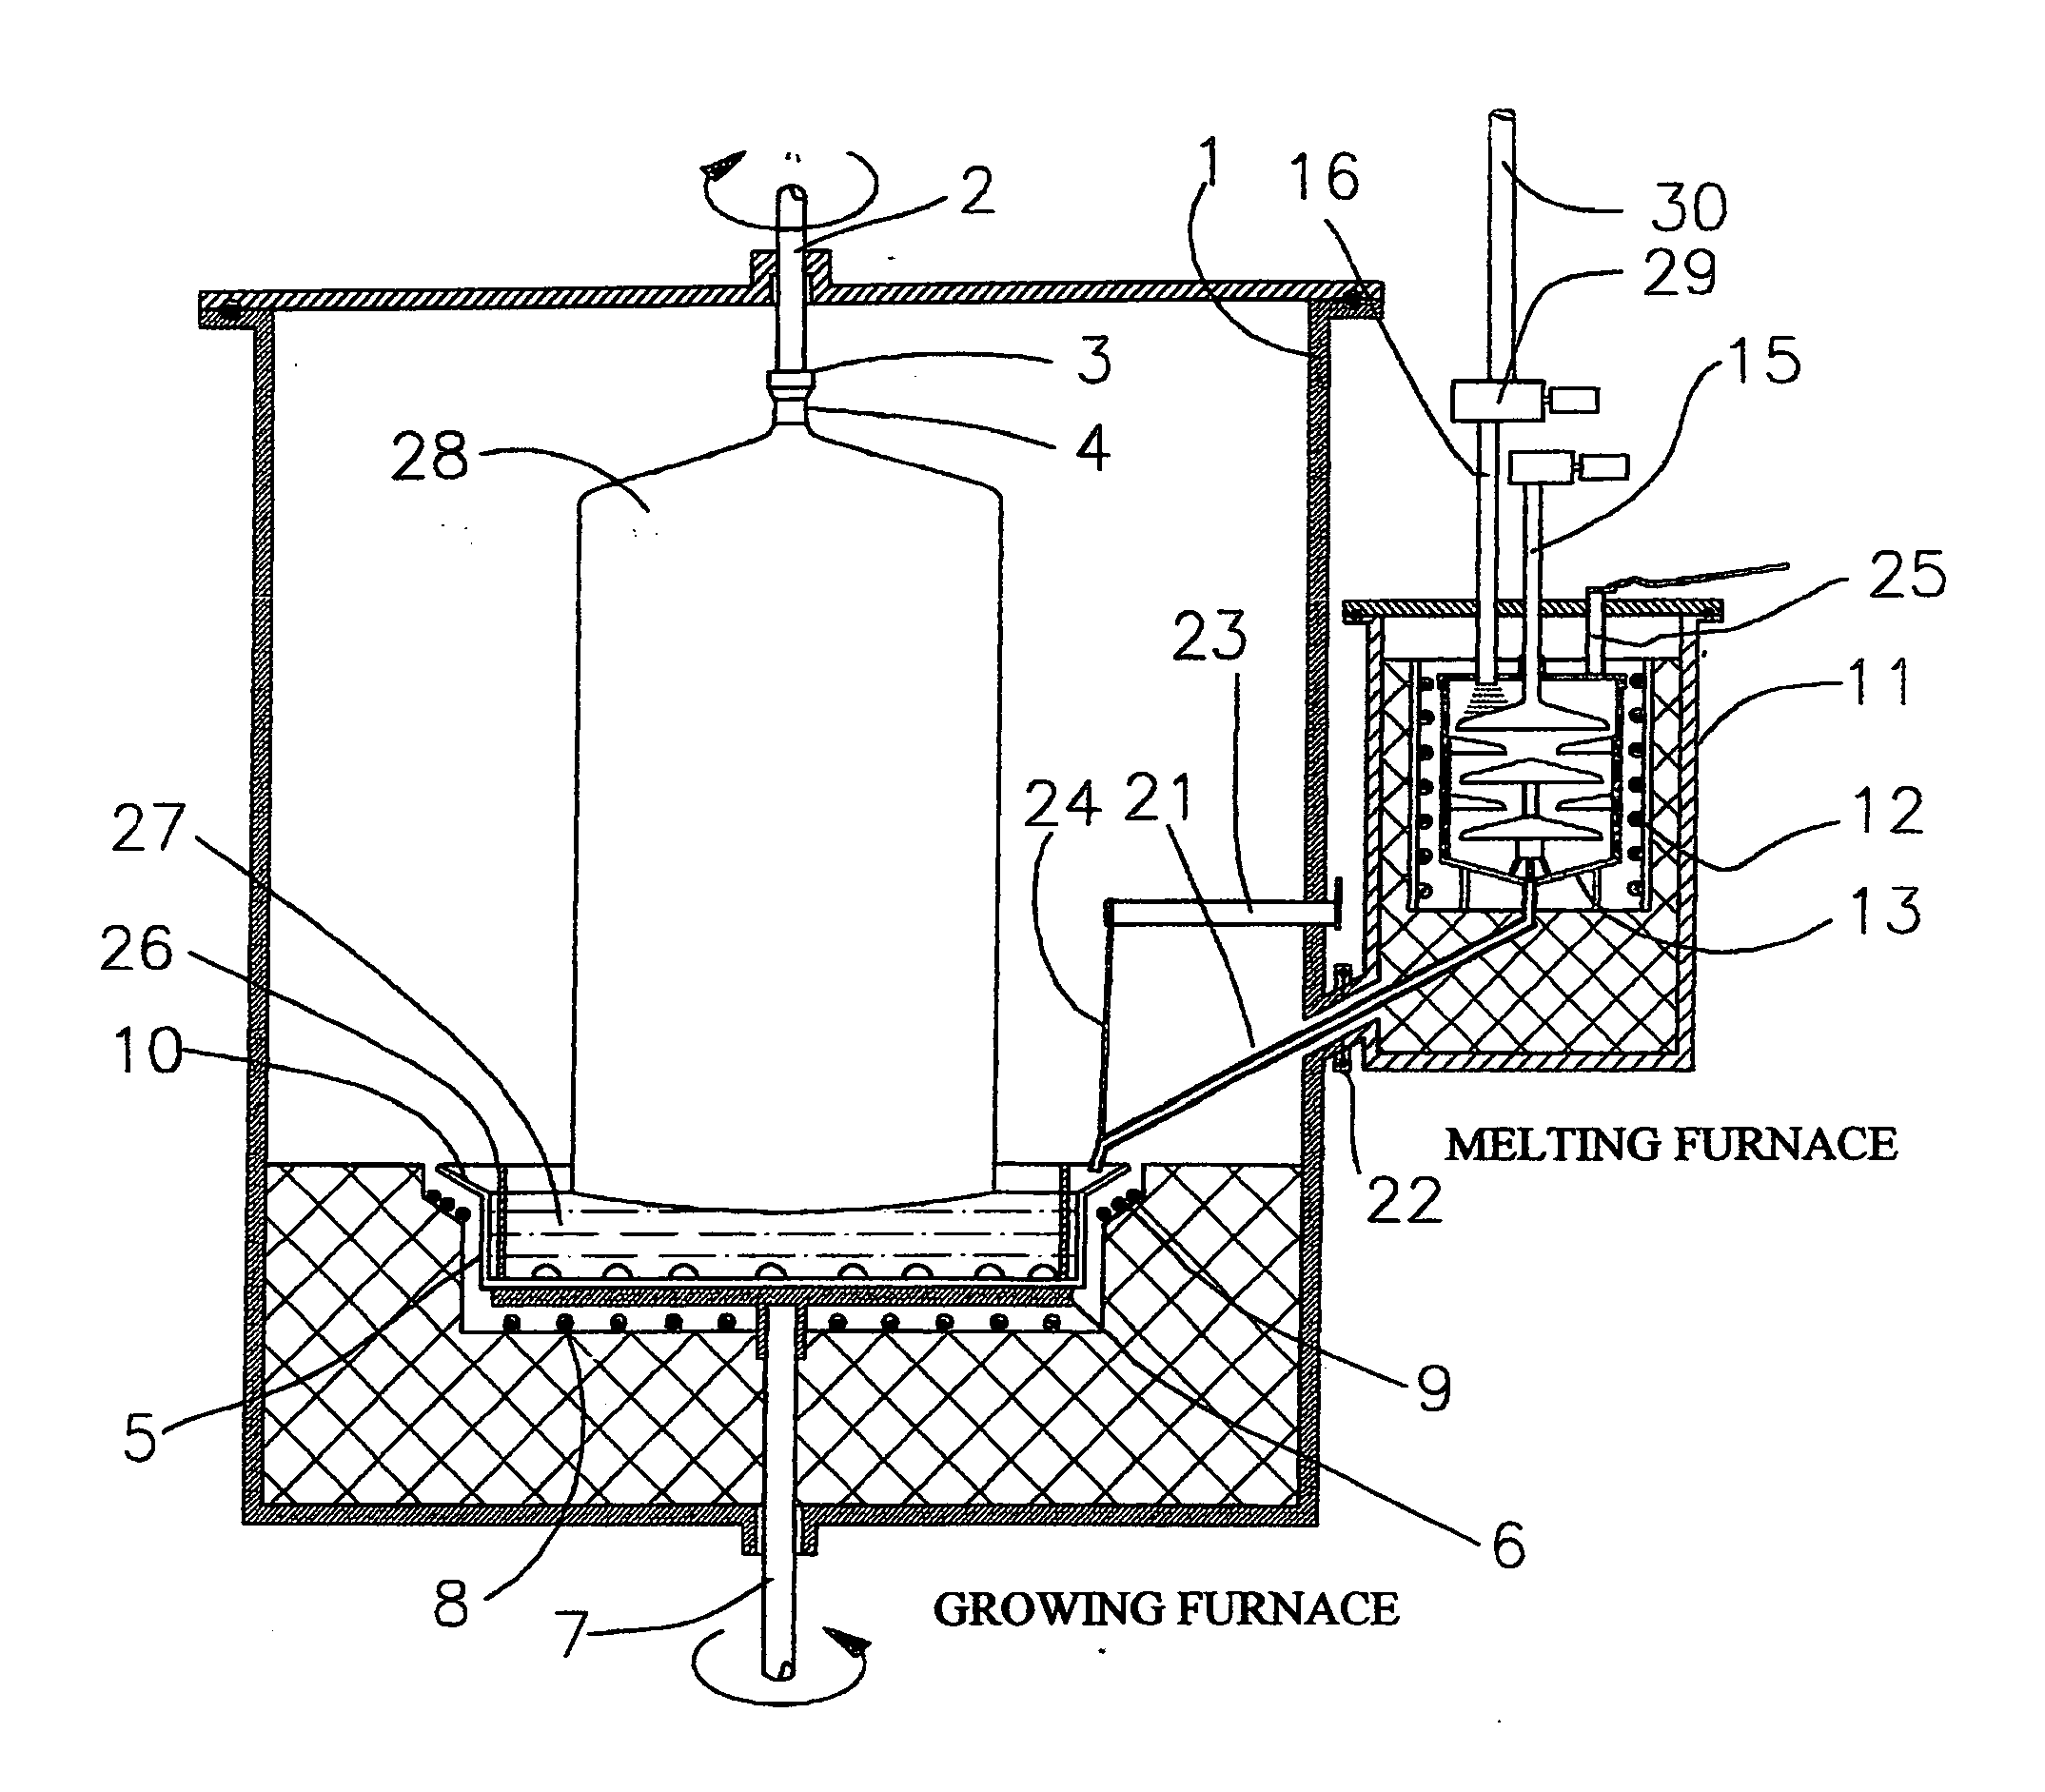 Controlled gravity feeding czochralski apparatus with on the way melting raw material